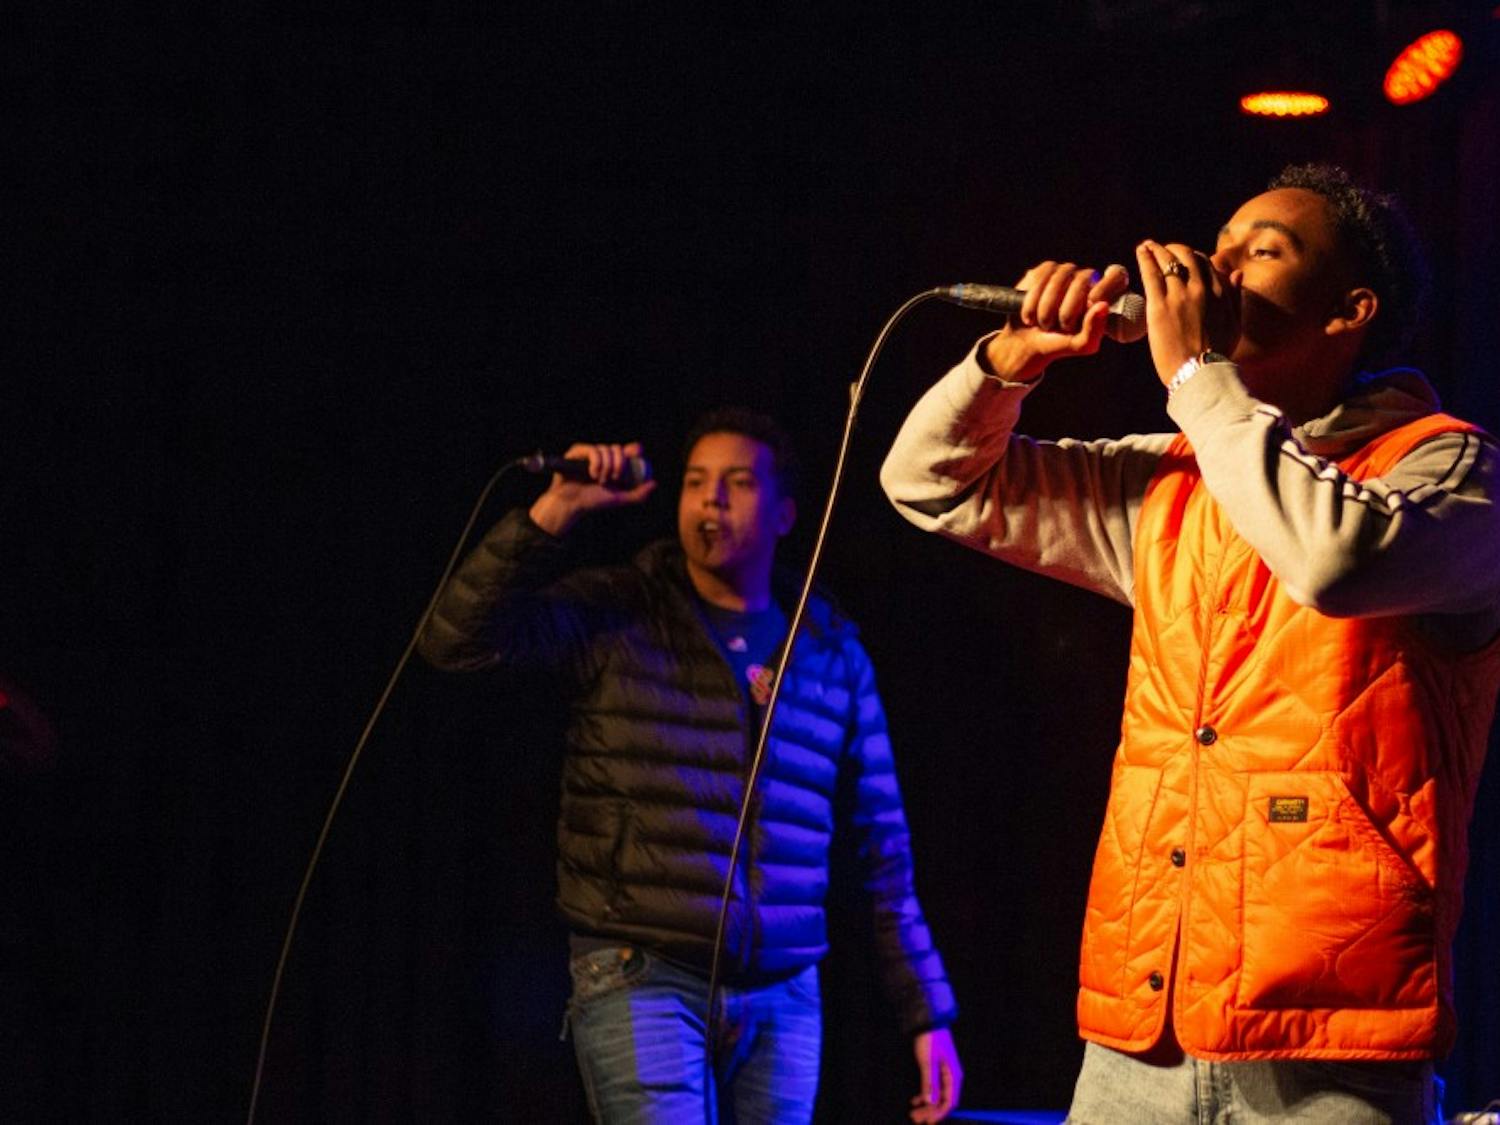 Jemal Abdulhadi (right) and Nicho Stevens (left) perform at the Cat's Cradle Back Room on Thursday, Jan. 31, 2019 at the King of the Hill: Hip Hop Showcase to promote and celebrate Abdulhadi's album release under the name of J Dasani. 